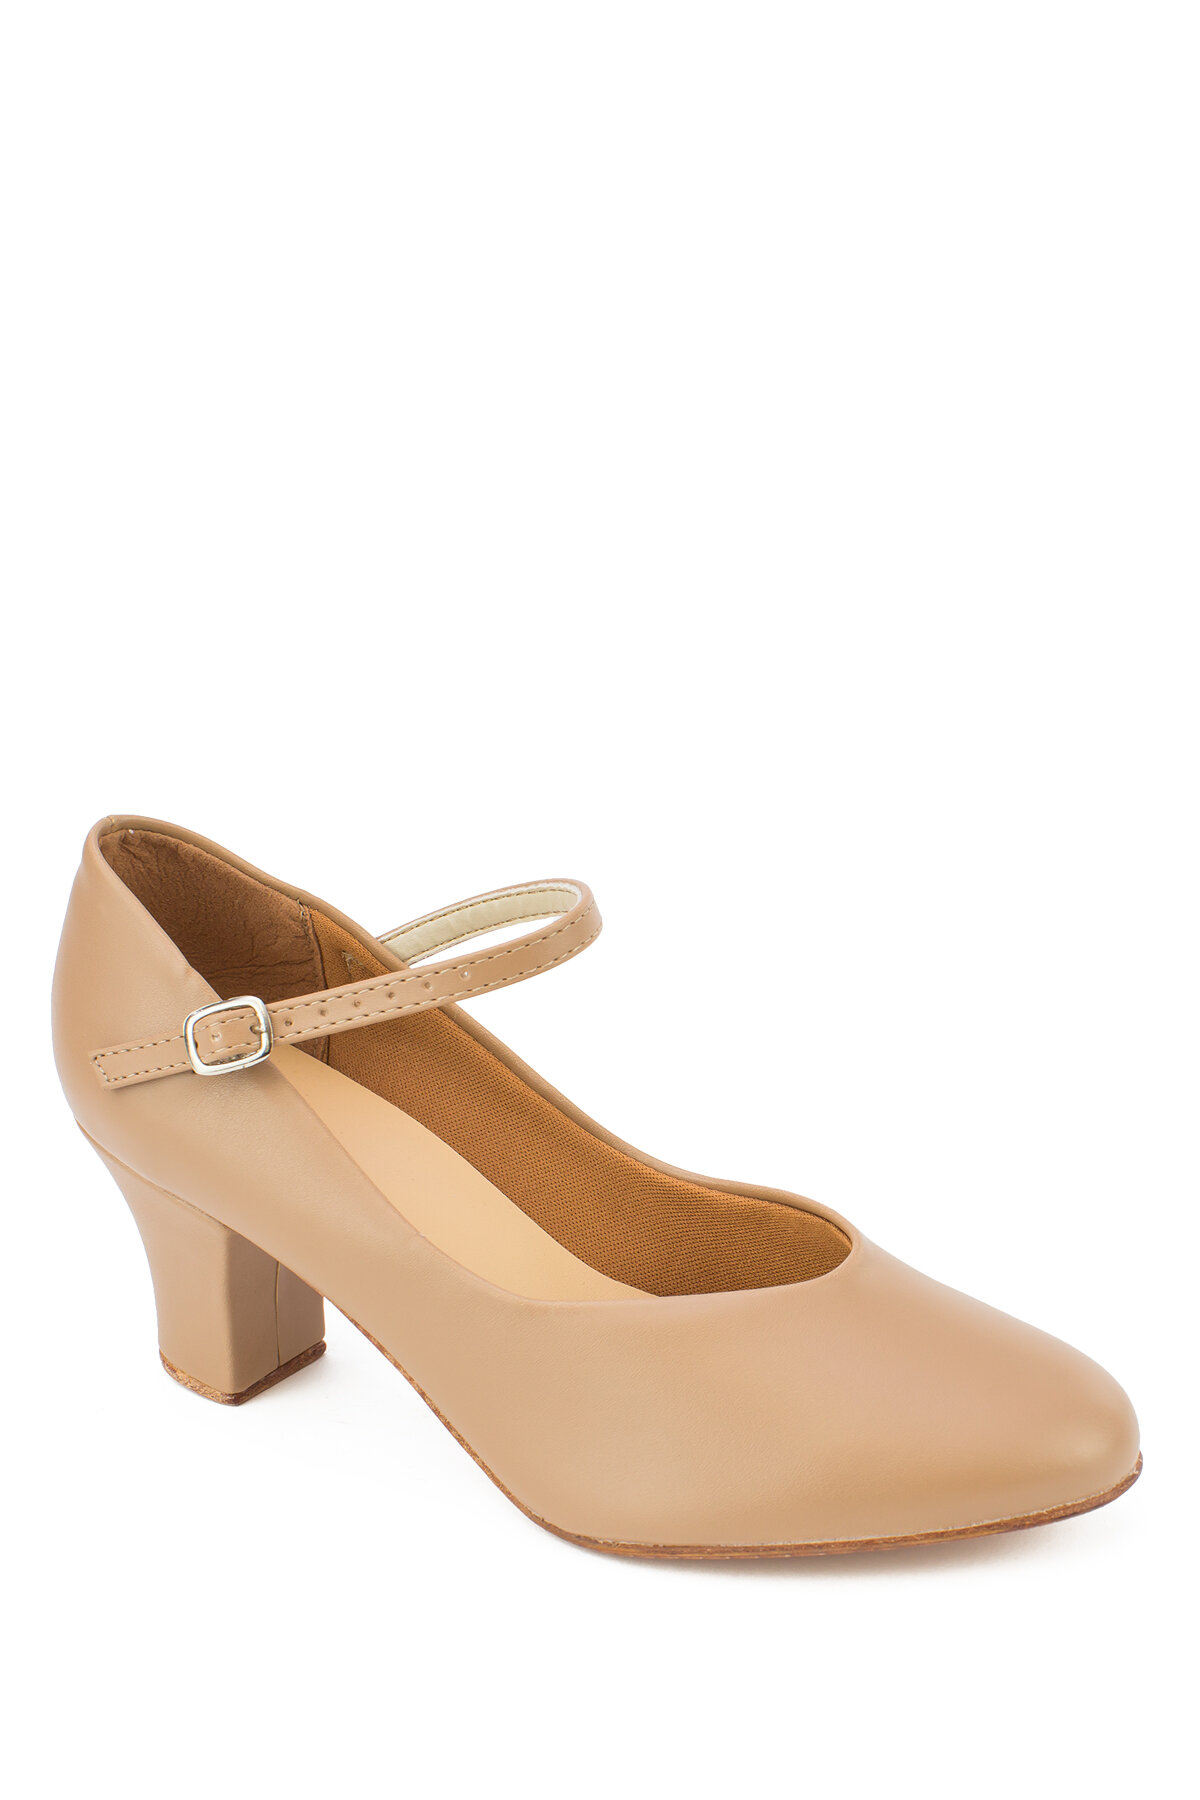 So Danca CH103 3 Leather T-Strap Character Heel